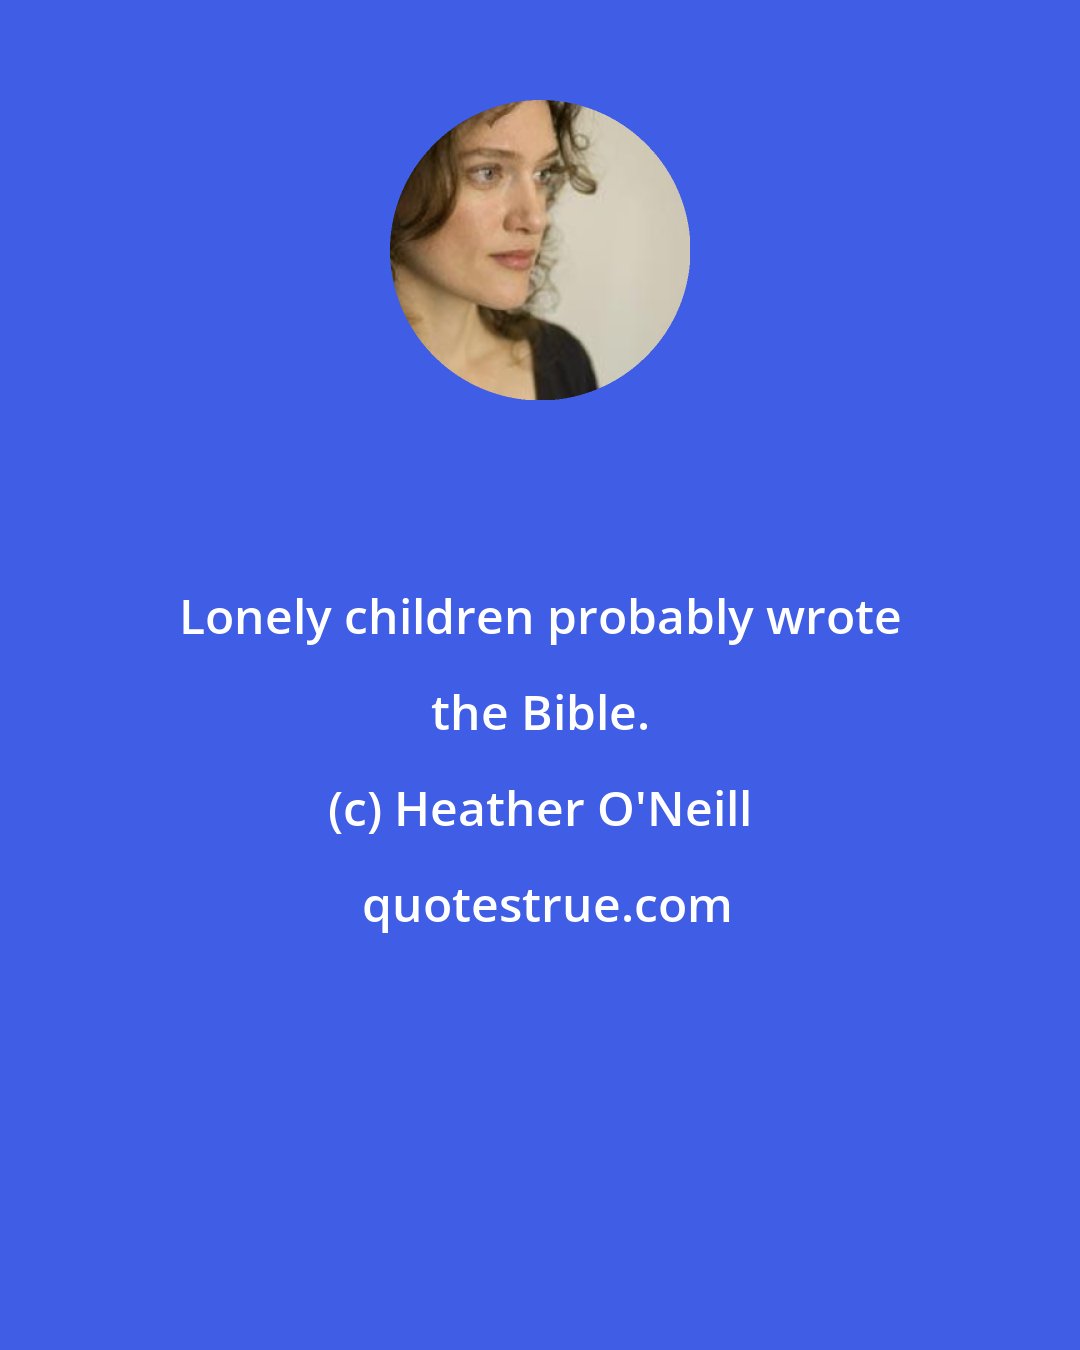 Heather O'Neill: Lonely children probably wrote the Bible.